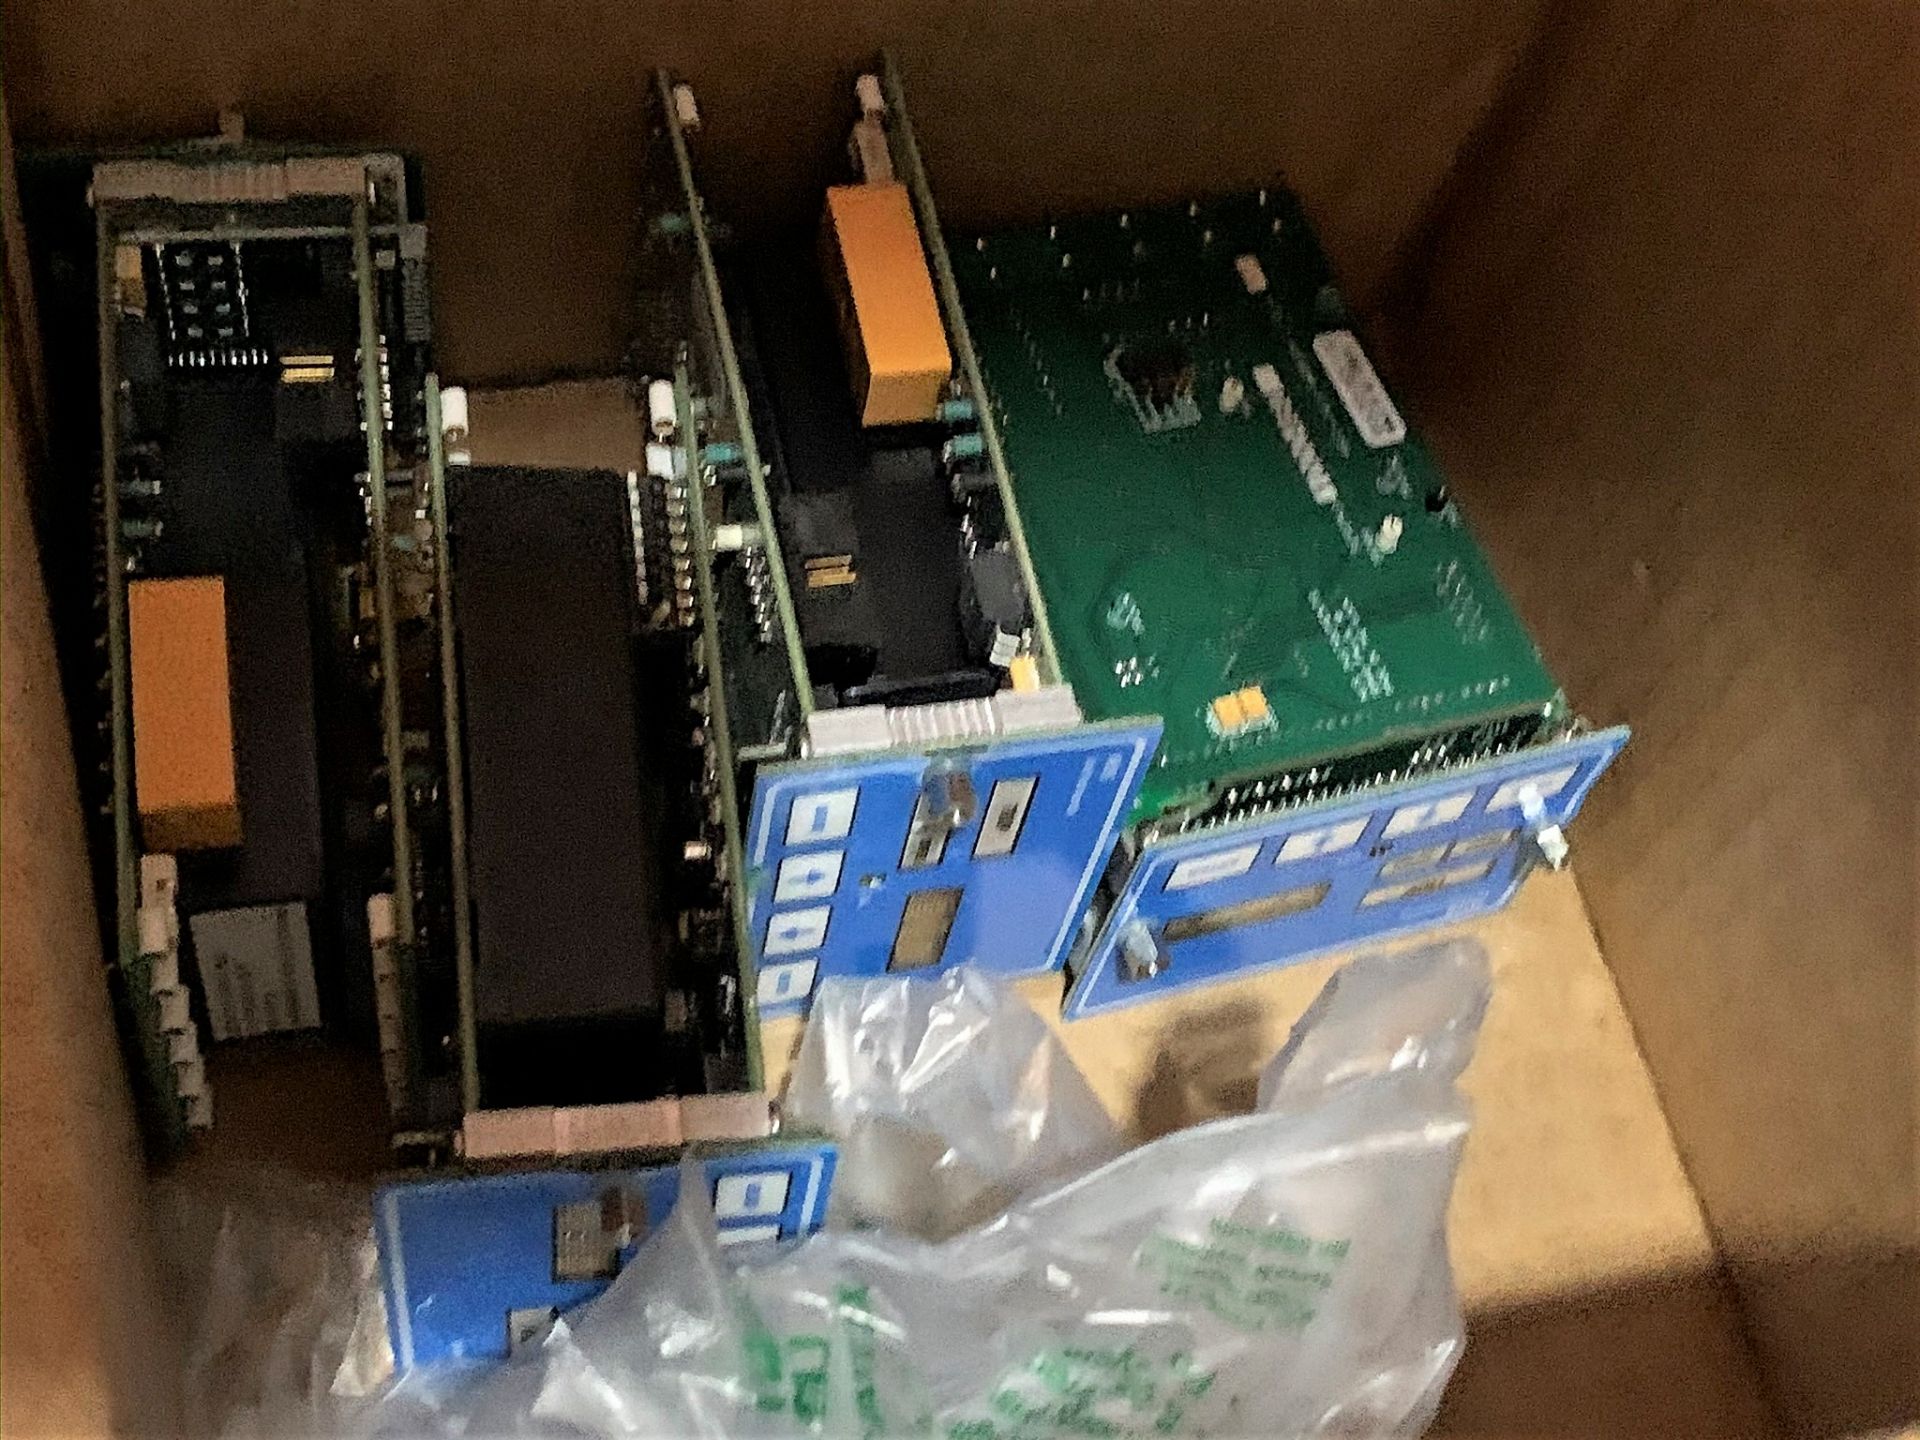 Lot of Assorted Enclosures, Circuit Boards, & Modules - Image 2 of 3